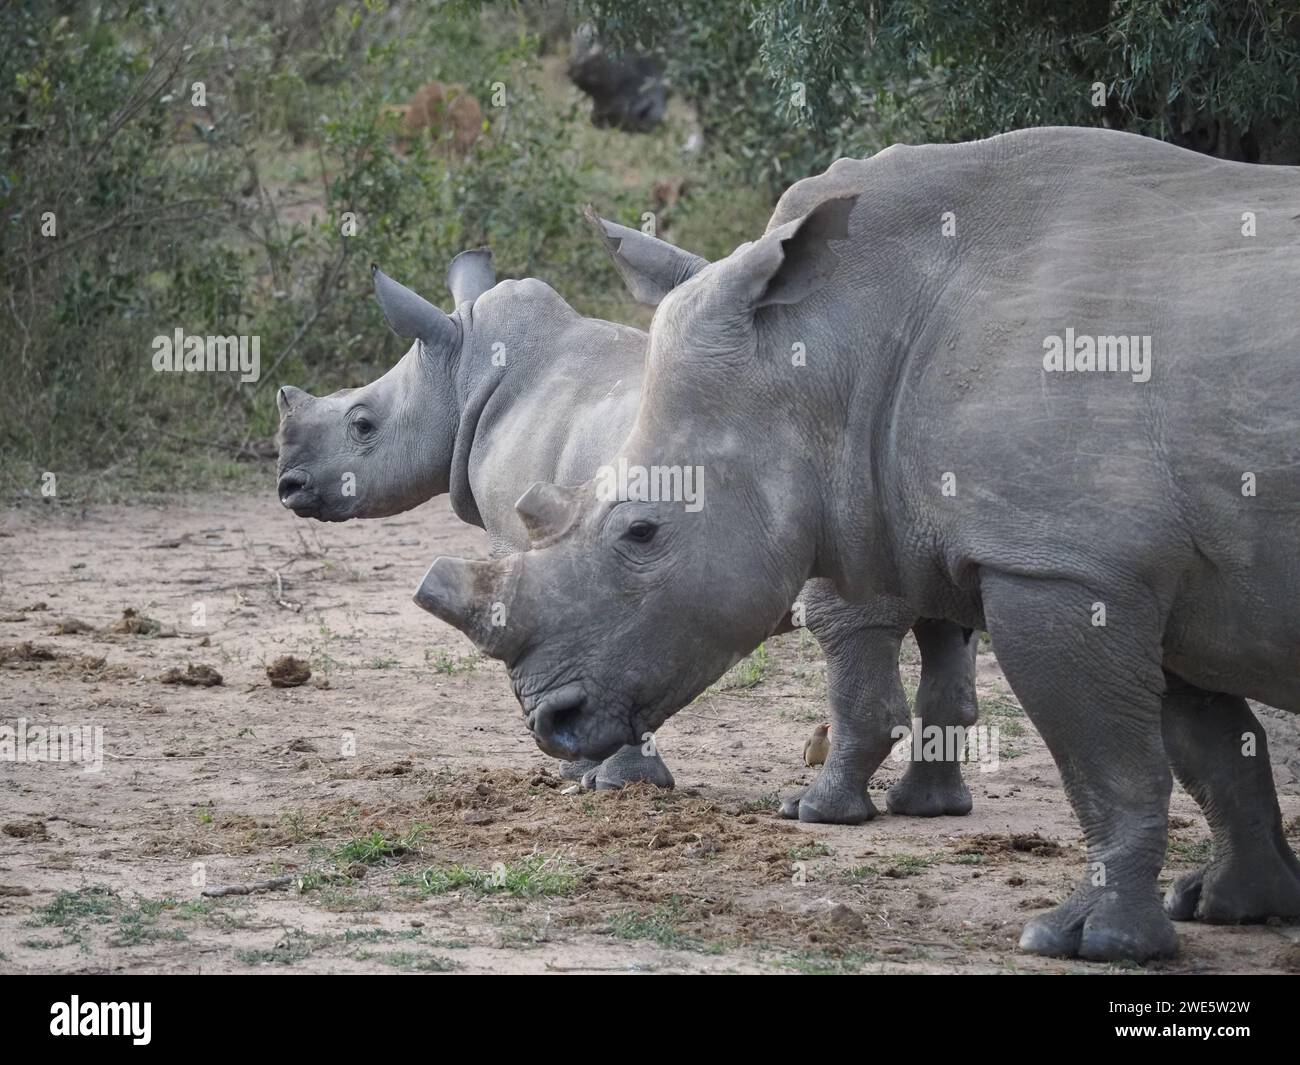 Two beautiful white rhinos in Kruger National Park, their horns safety removed to deter poaching efforts. Stock Photo